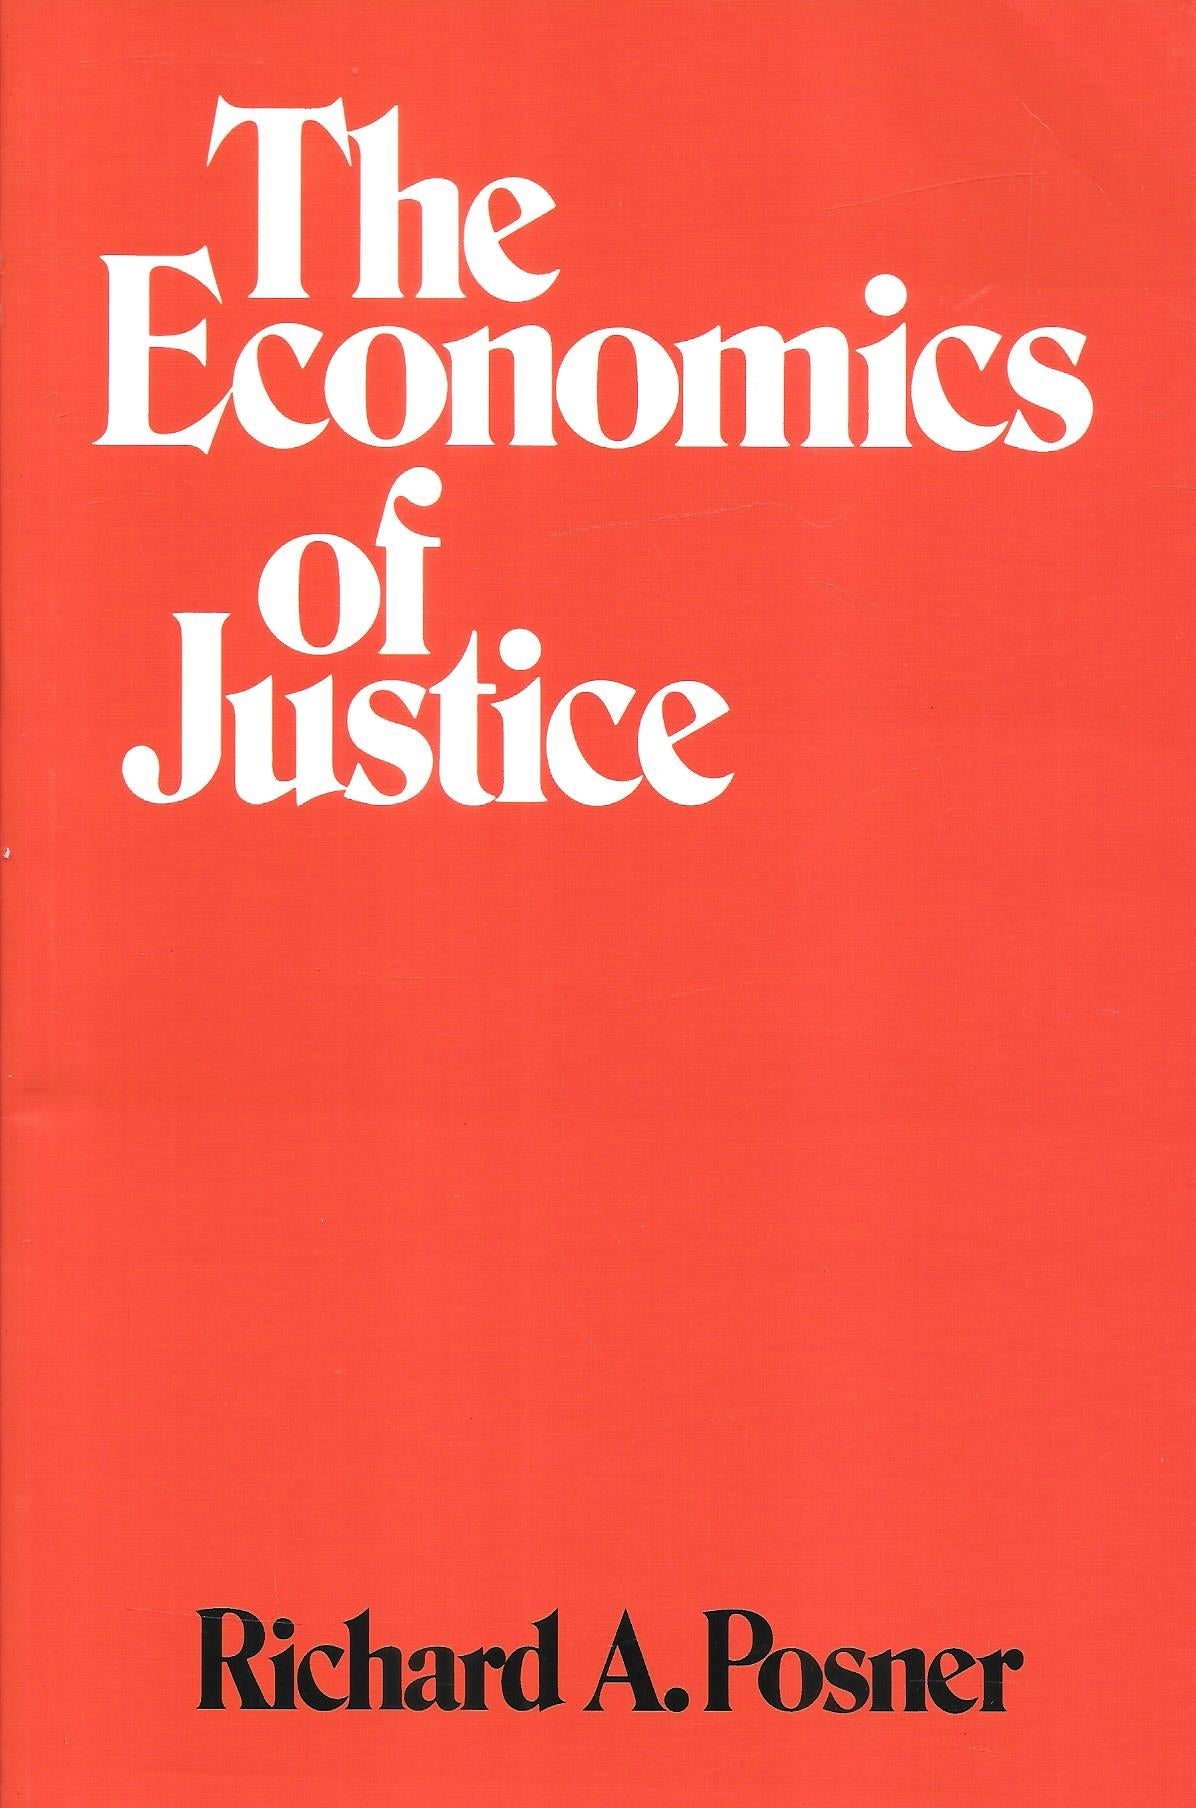 The Economic of Justice